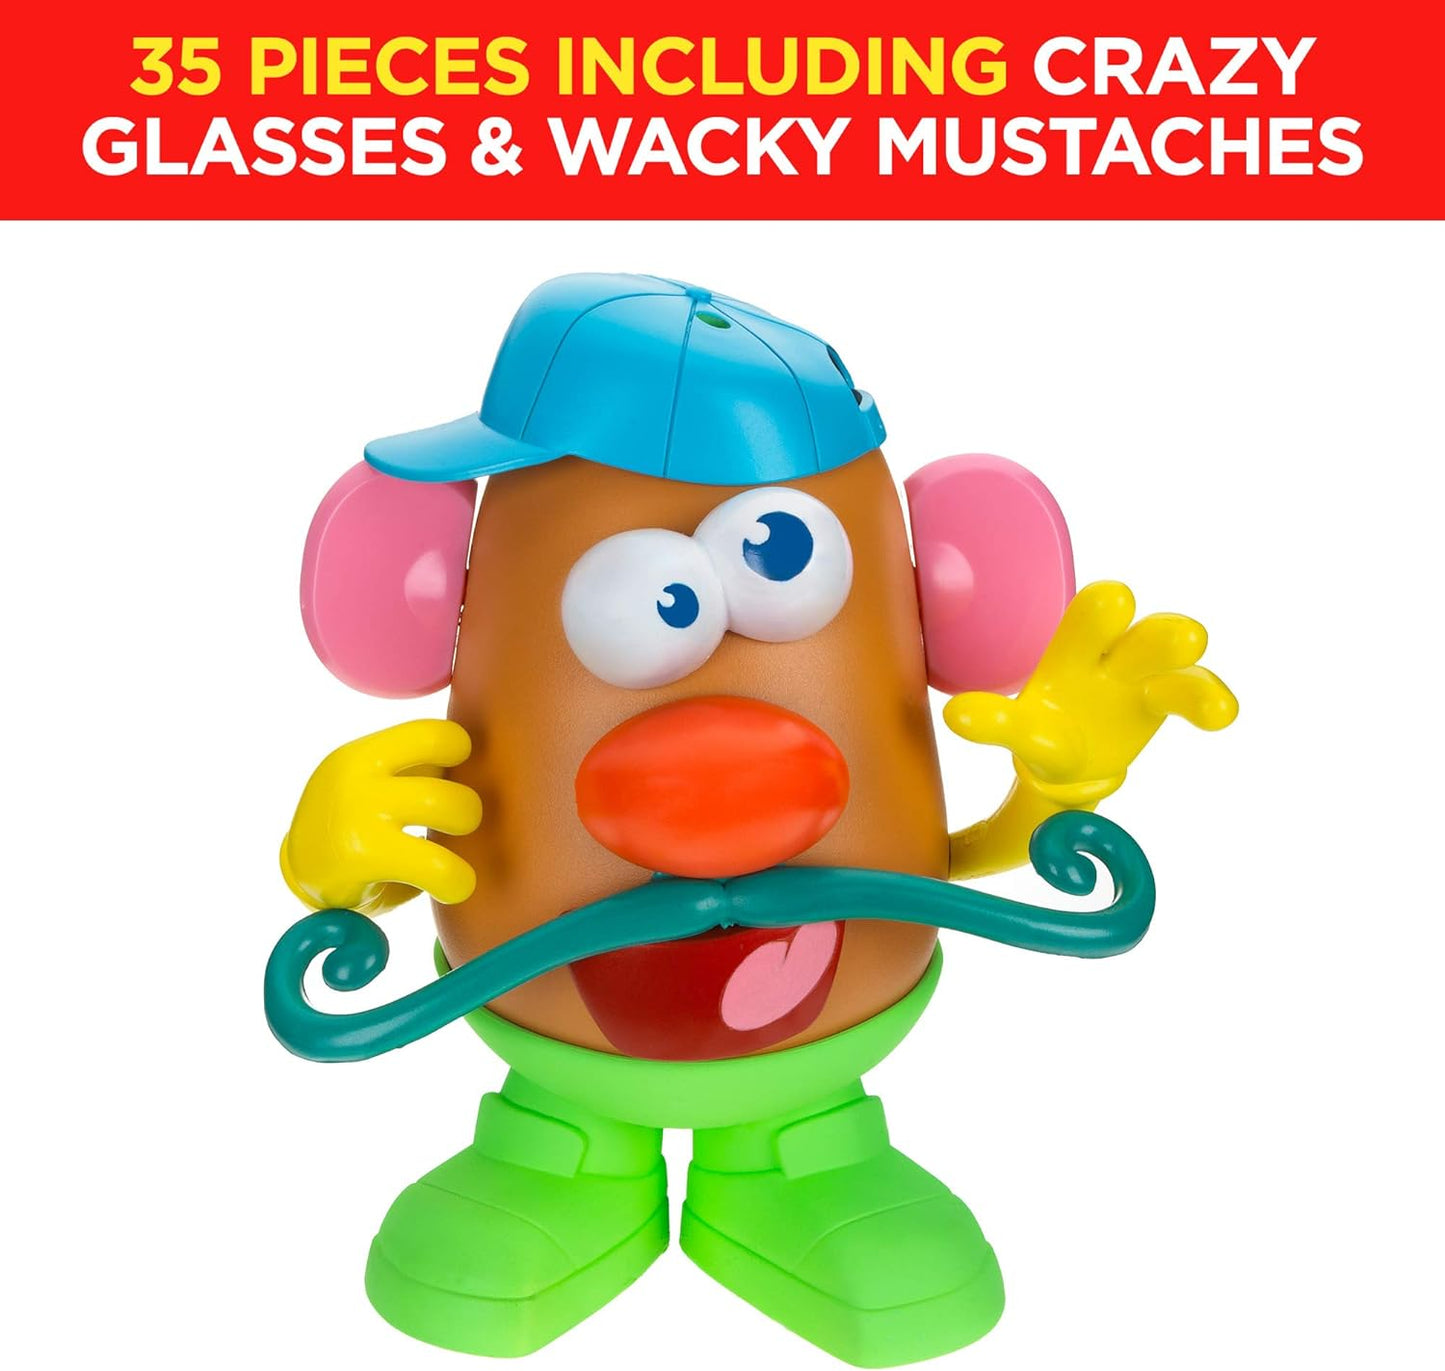 Potato Head Silly Suitcase Parts and Pieces Toddler Toy for Kids (Amazon Exclusive)